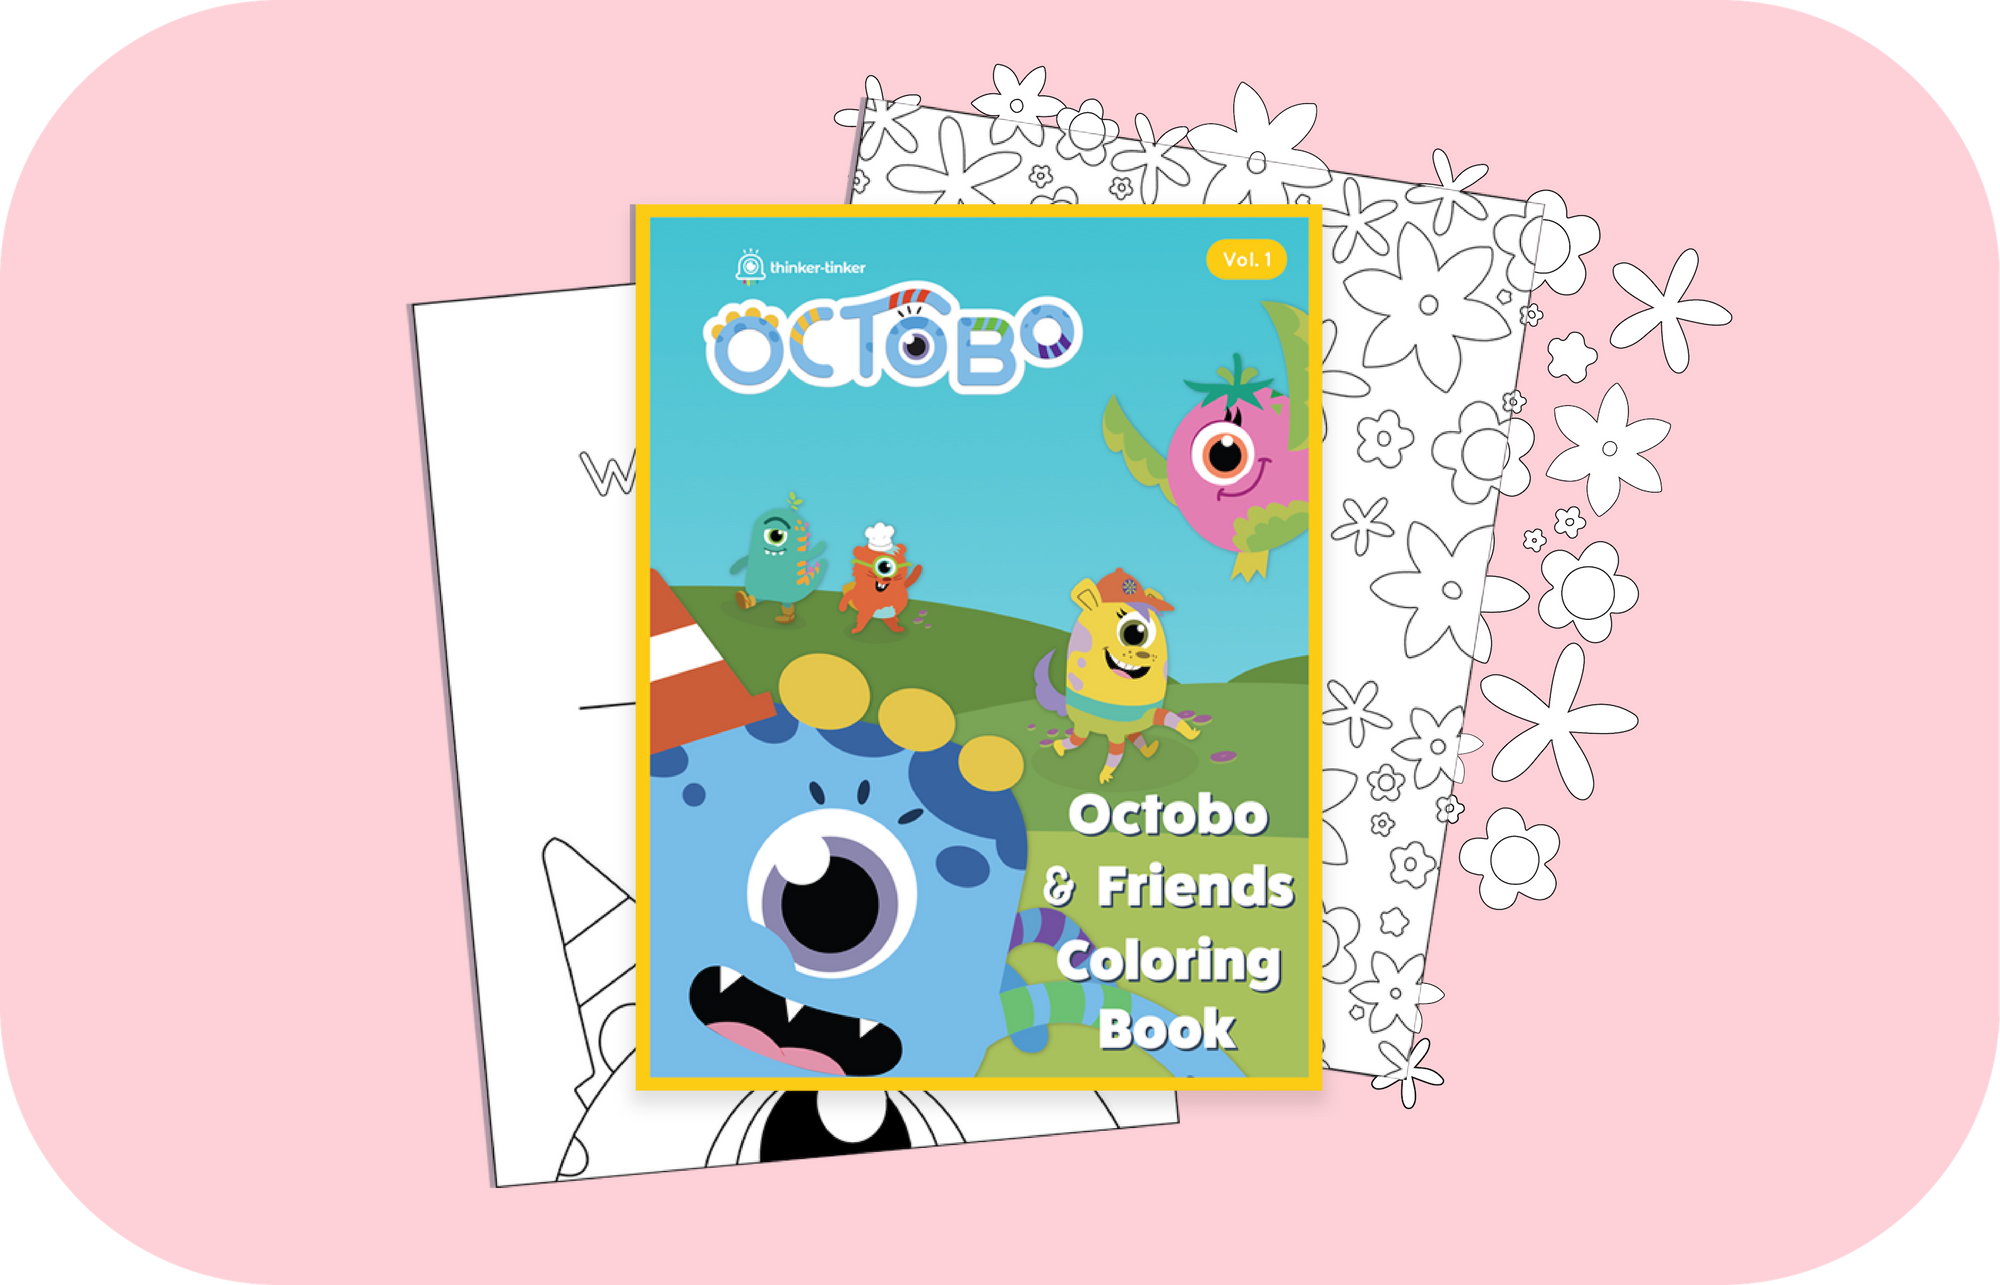 Octobo Coloring Book (Vol.1) – Octobo and Friends!